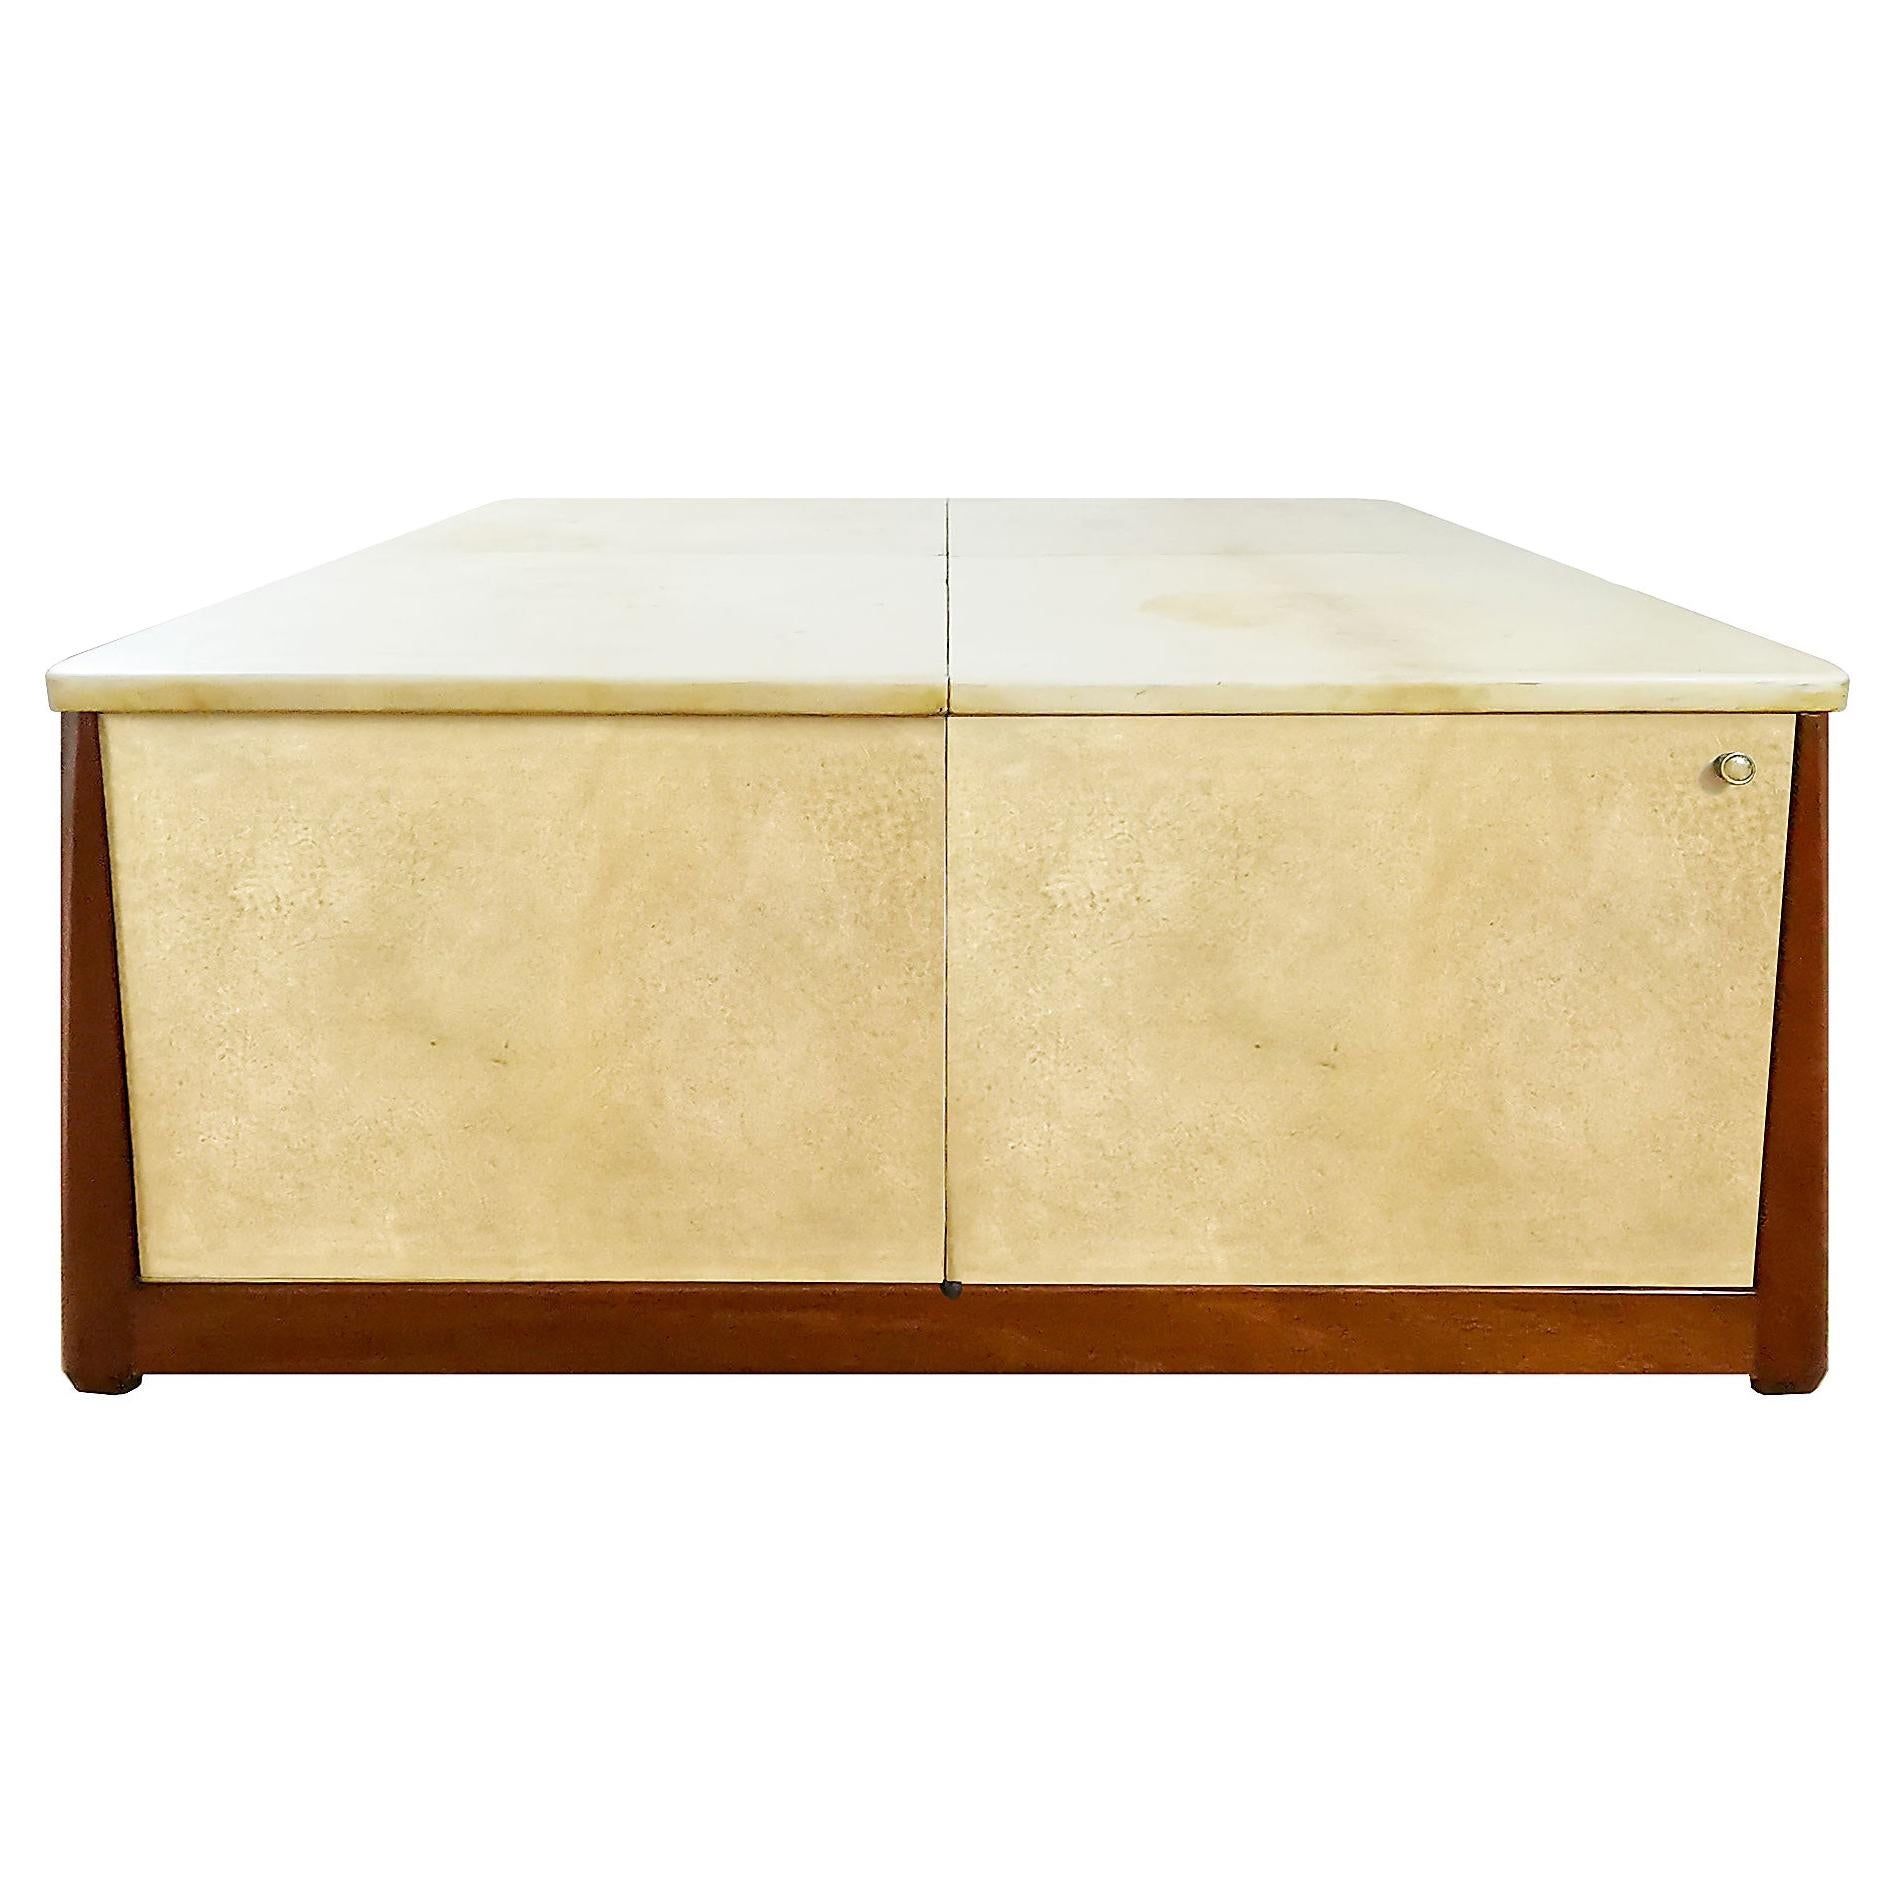 1960´s Large Square Coffee Table by Pere Cosp, Mahogany, Parchment, Barcelona